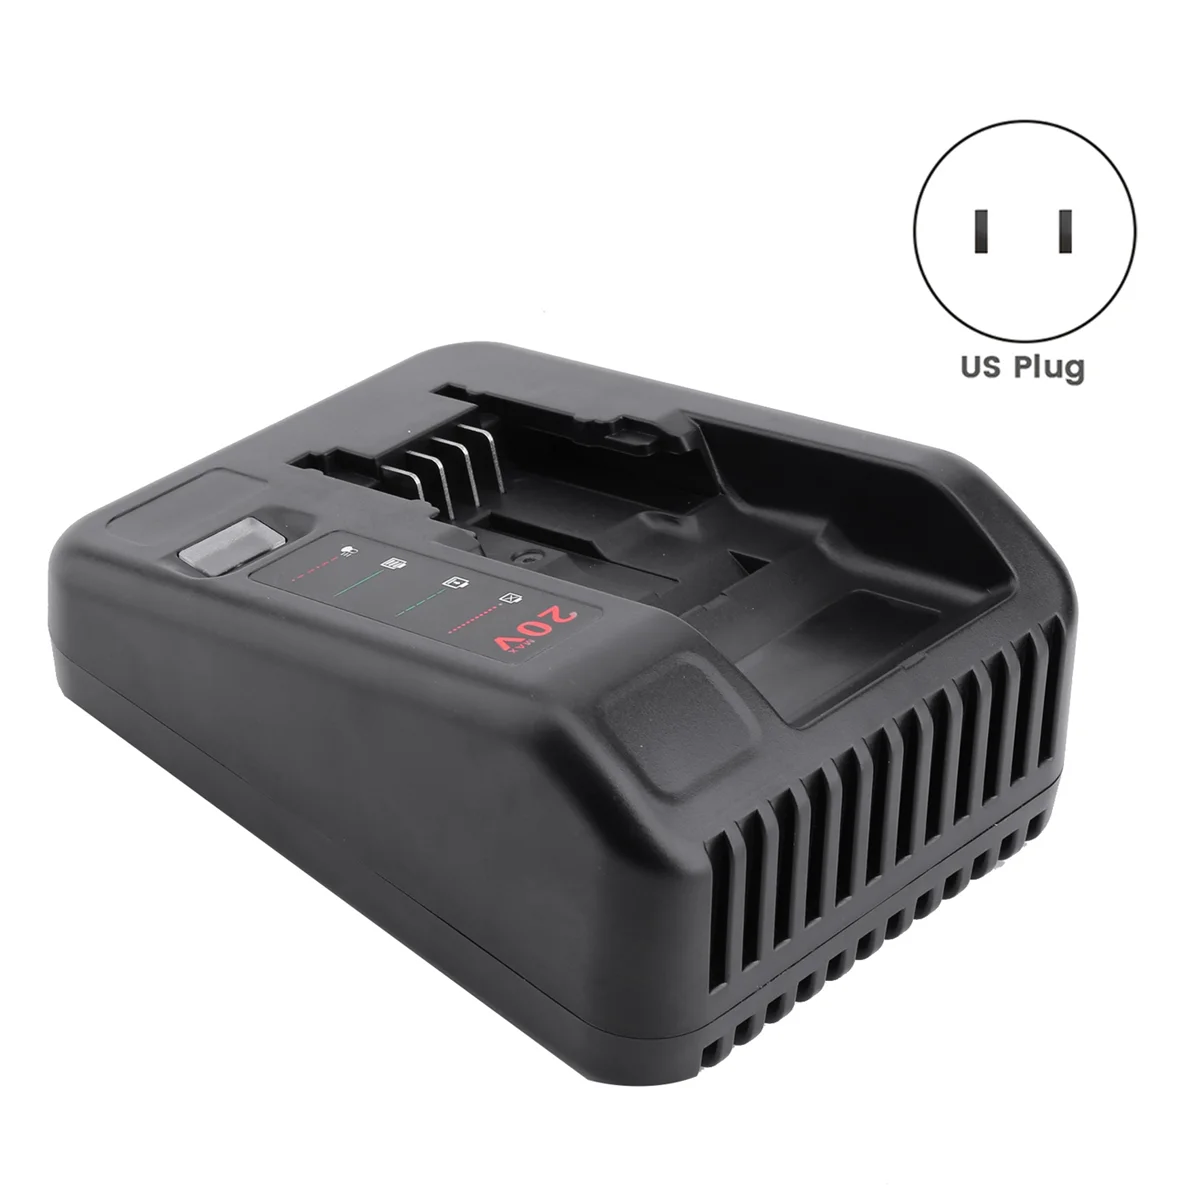 https://ae01.alicdn.com/kf/S0cf29a9295224fd995a0f2eefe44178dq/20V-Lithium-Battery-Charger-for-Black-and-Decker-PORTER-CABLE-Stanley-Lithium-Battery-Charger-US-Plug.jpg